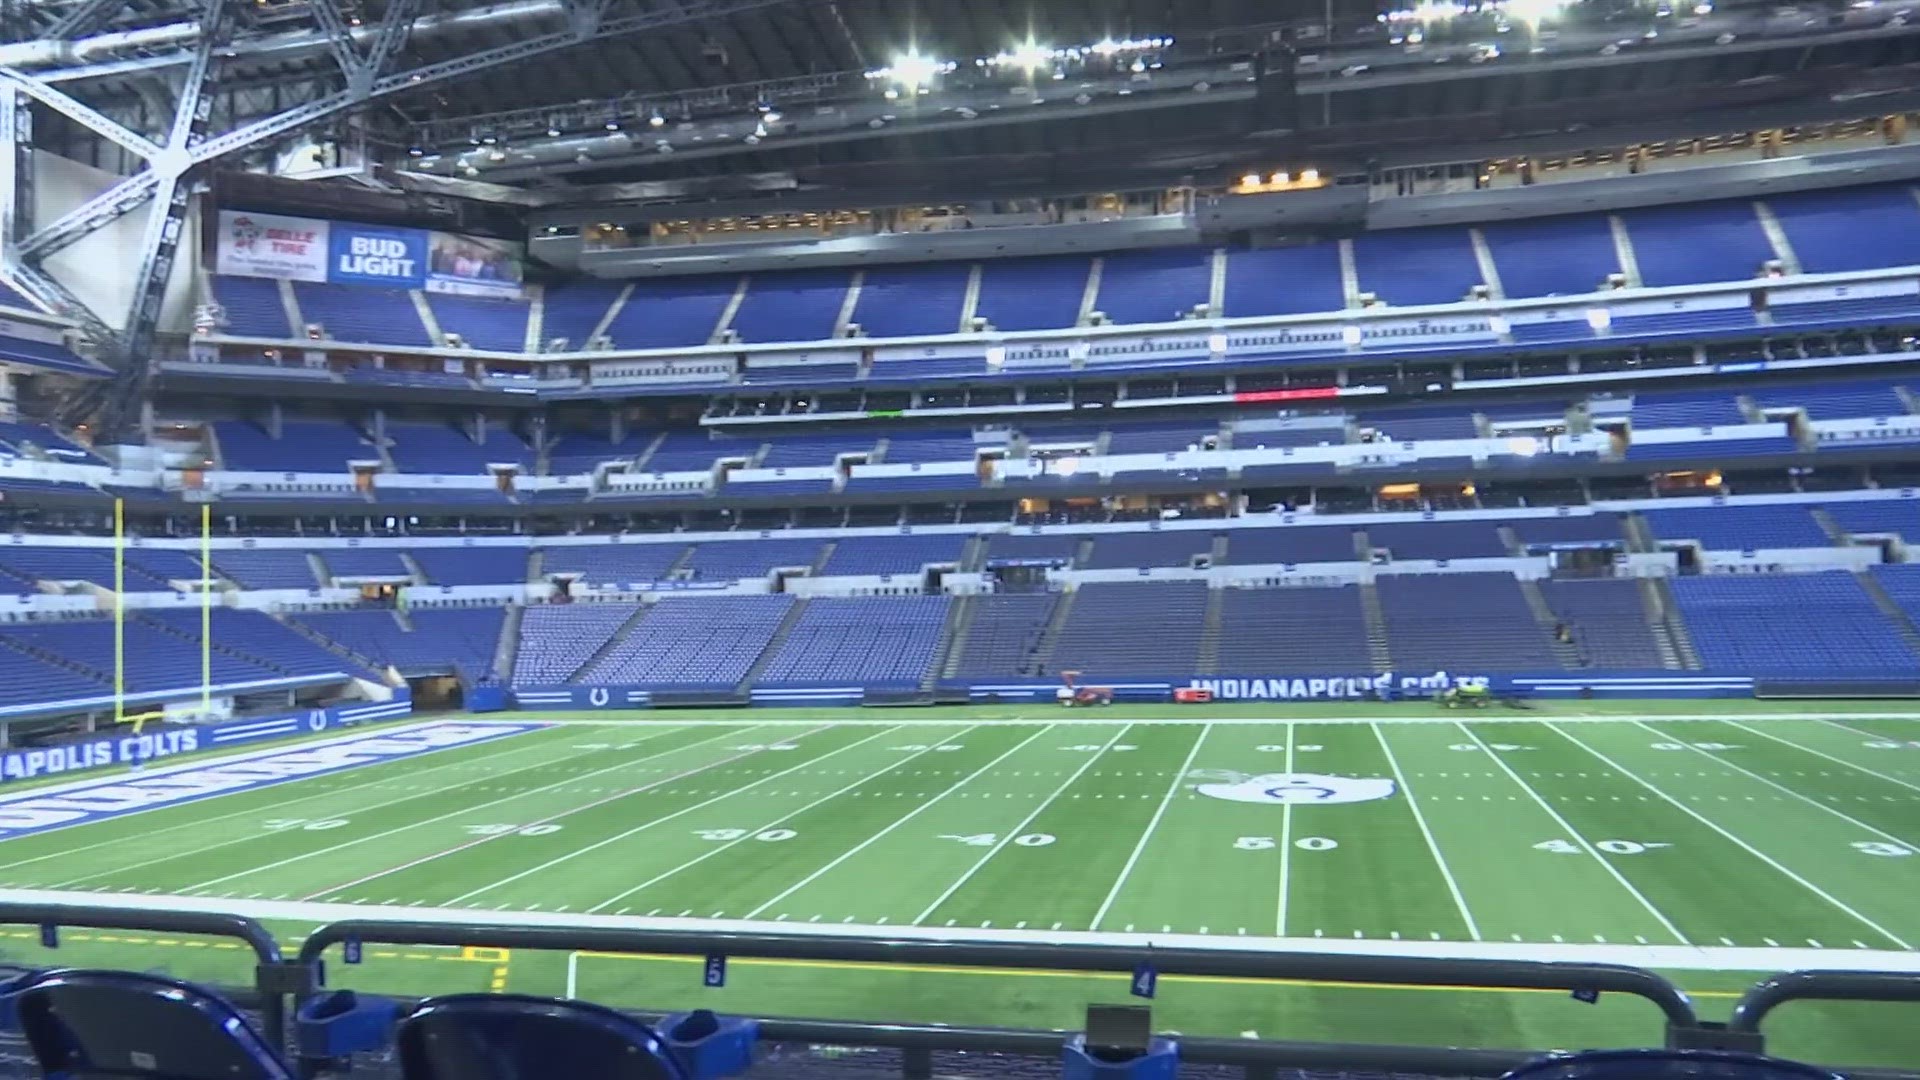 New turf is being installed at Lucas Oil.